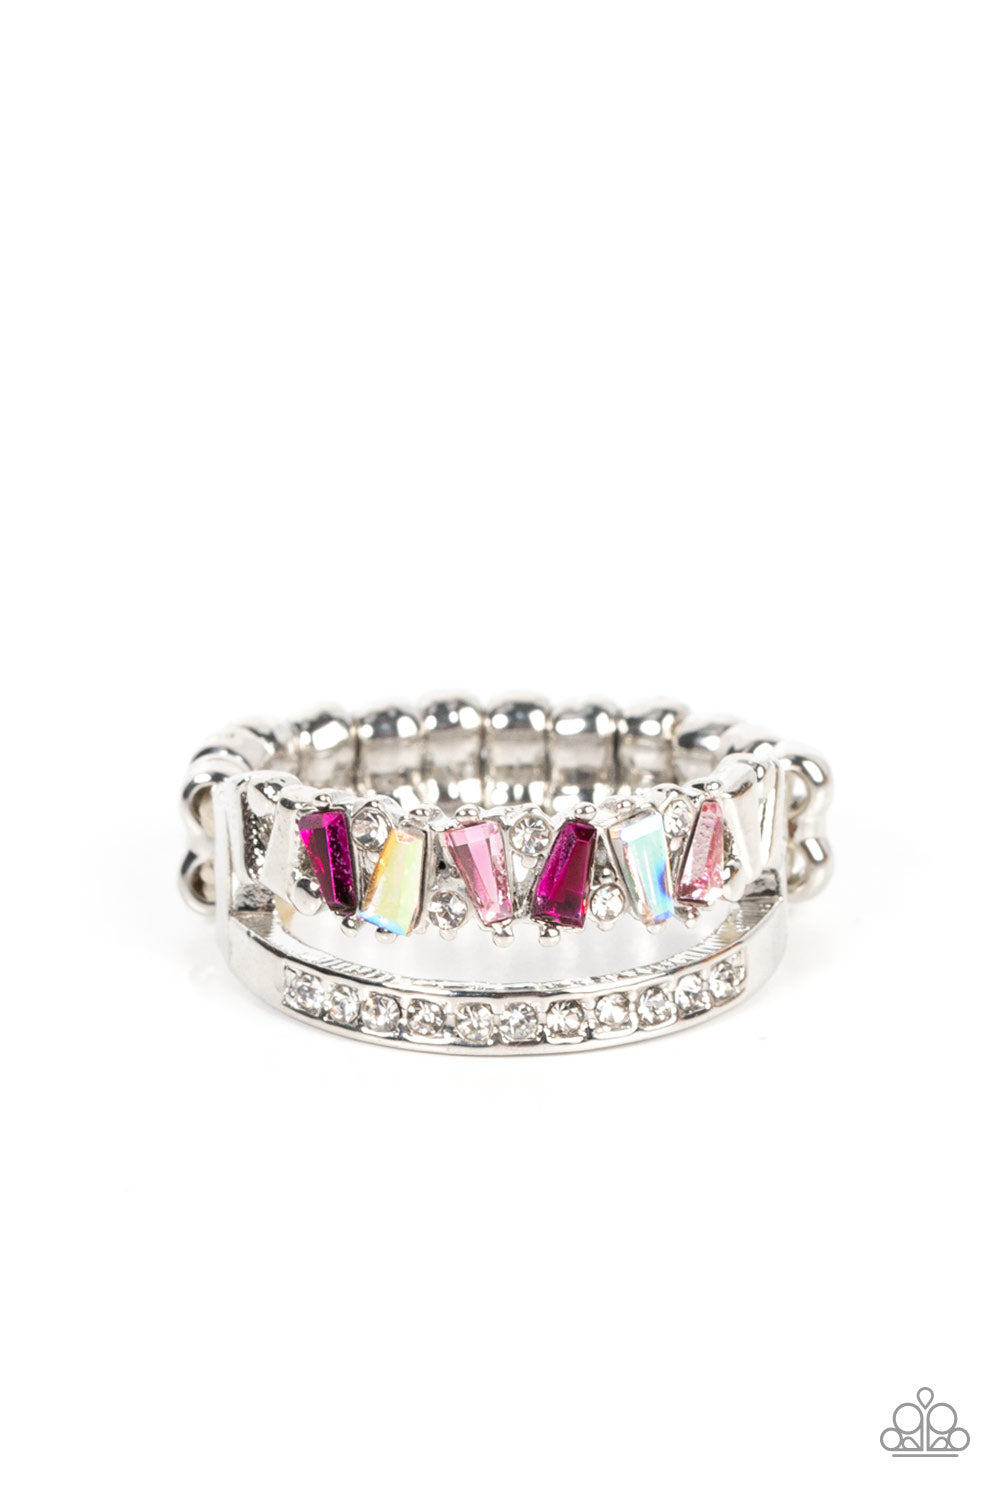 Layer On The Luster - Pink and Silver Ring - Paparazzi Accessories